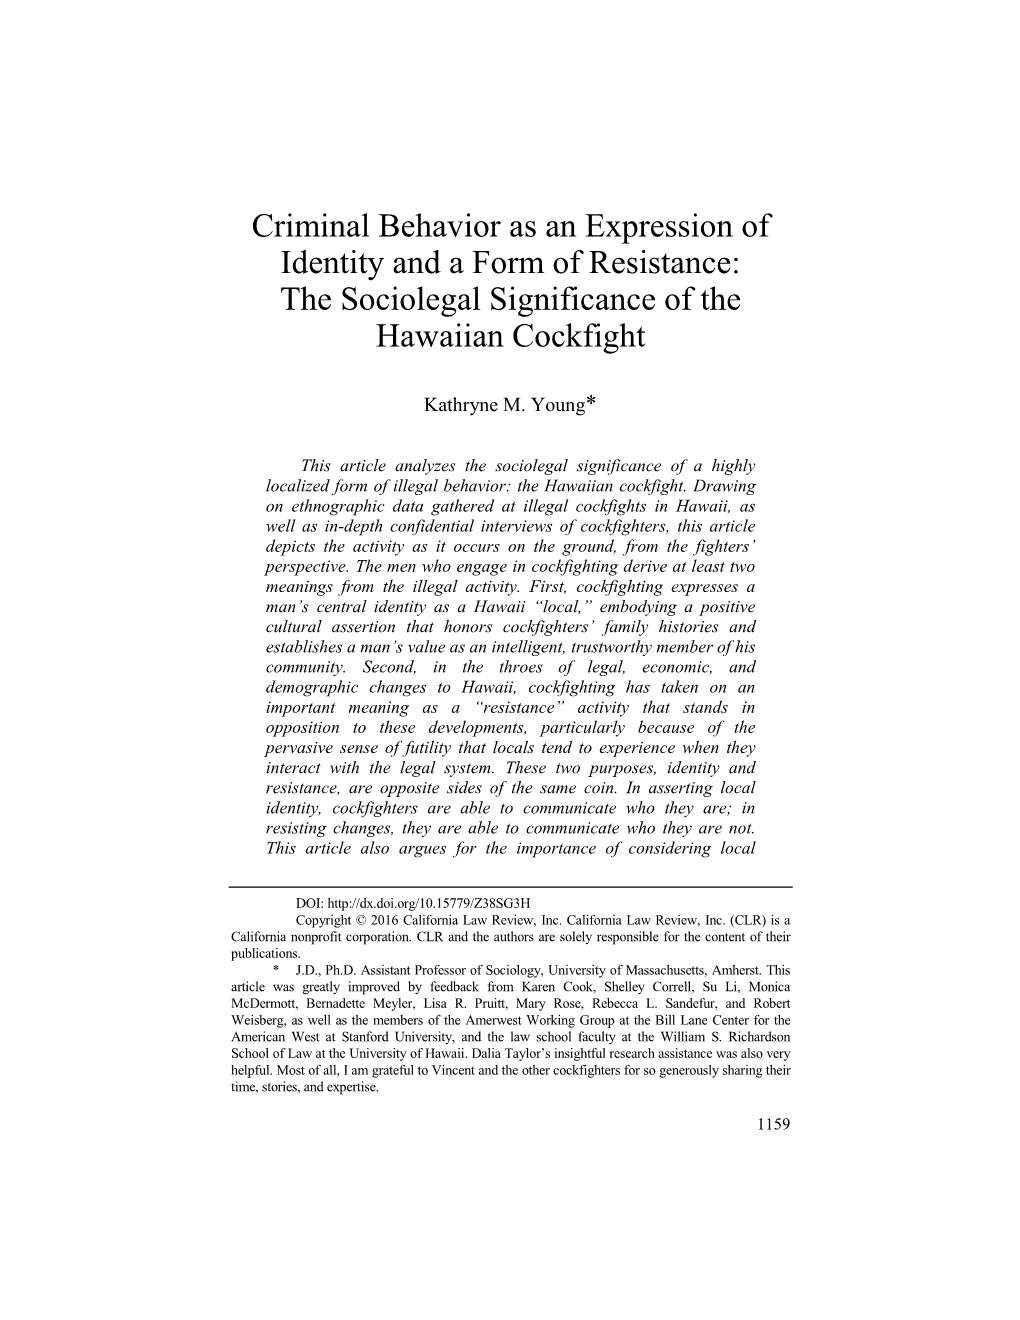 Criminal Behavior As an Expression of Identity and a Form of Resistance: the Sociolegal Significance of the Hawaiian Cockfight